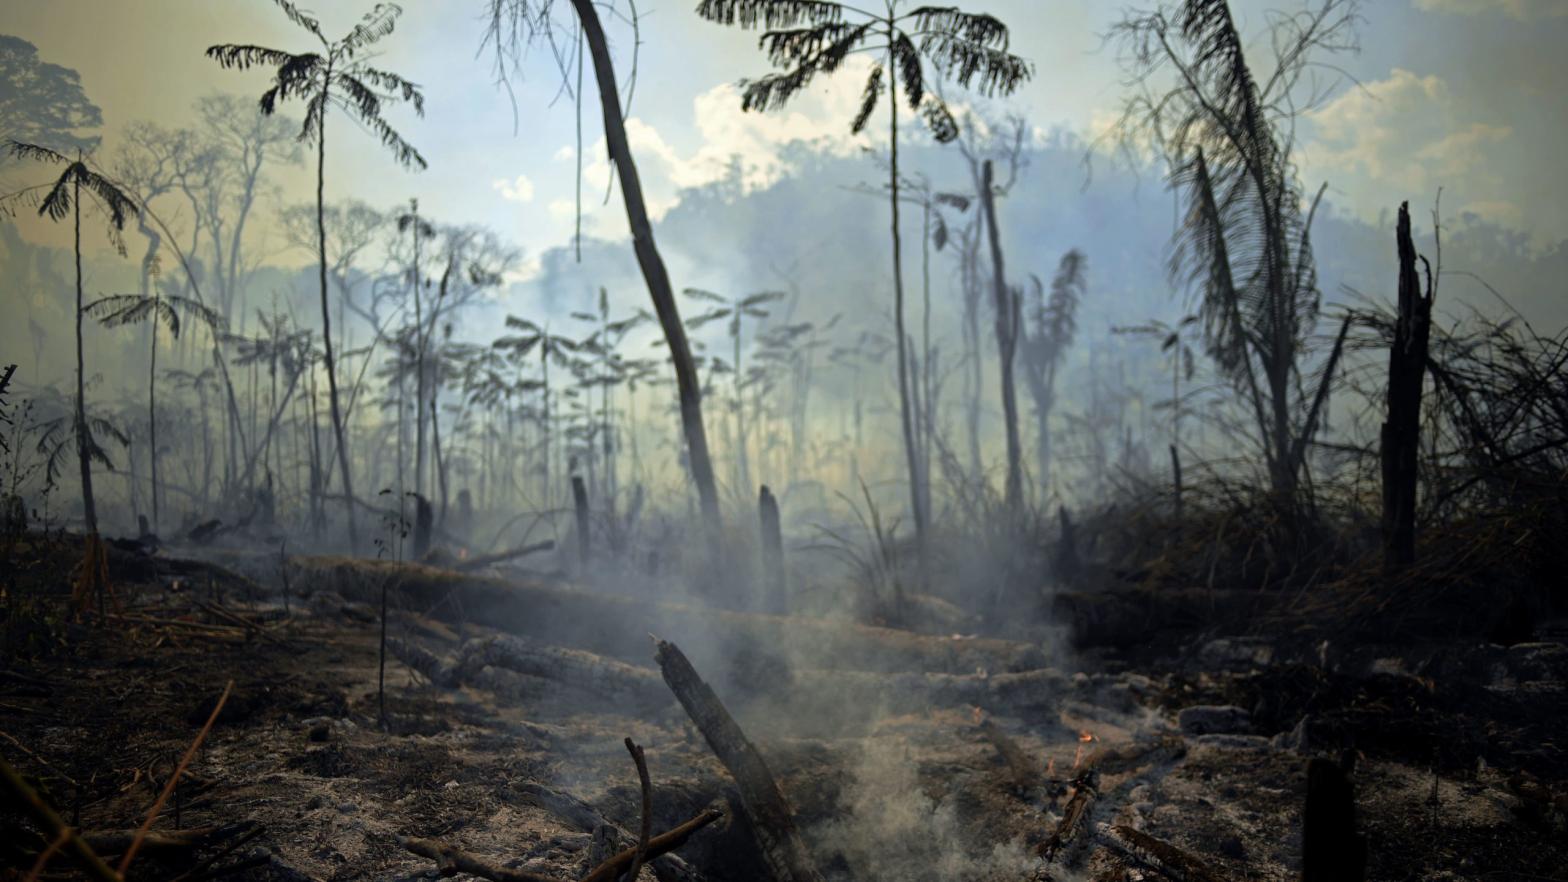 View of a burnt area of Amazon rainforest reserve in Para, Brazil on August 16, 2020. (Photo: Carl De Souza, Getty Images)